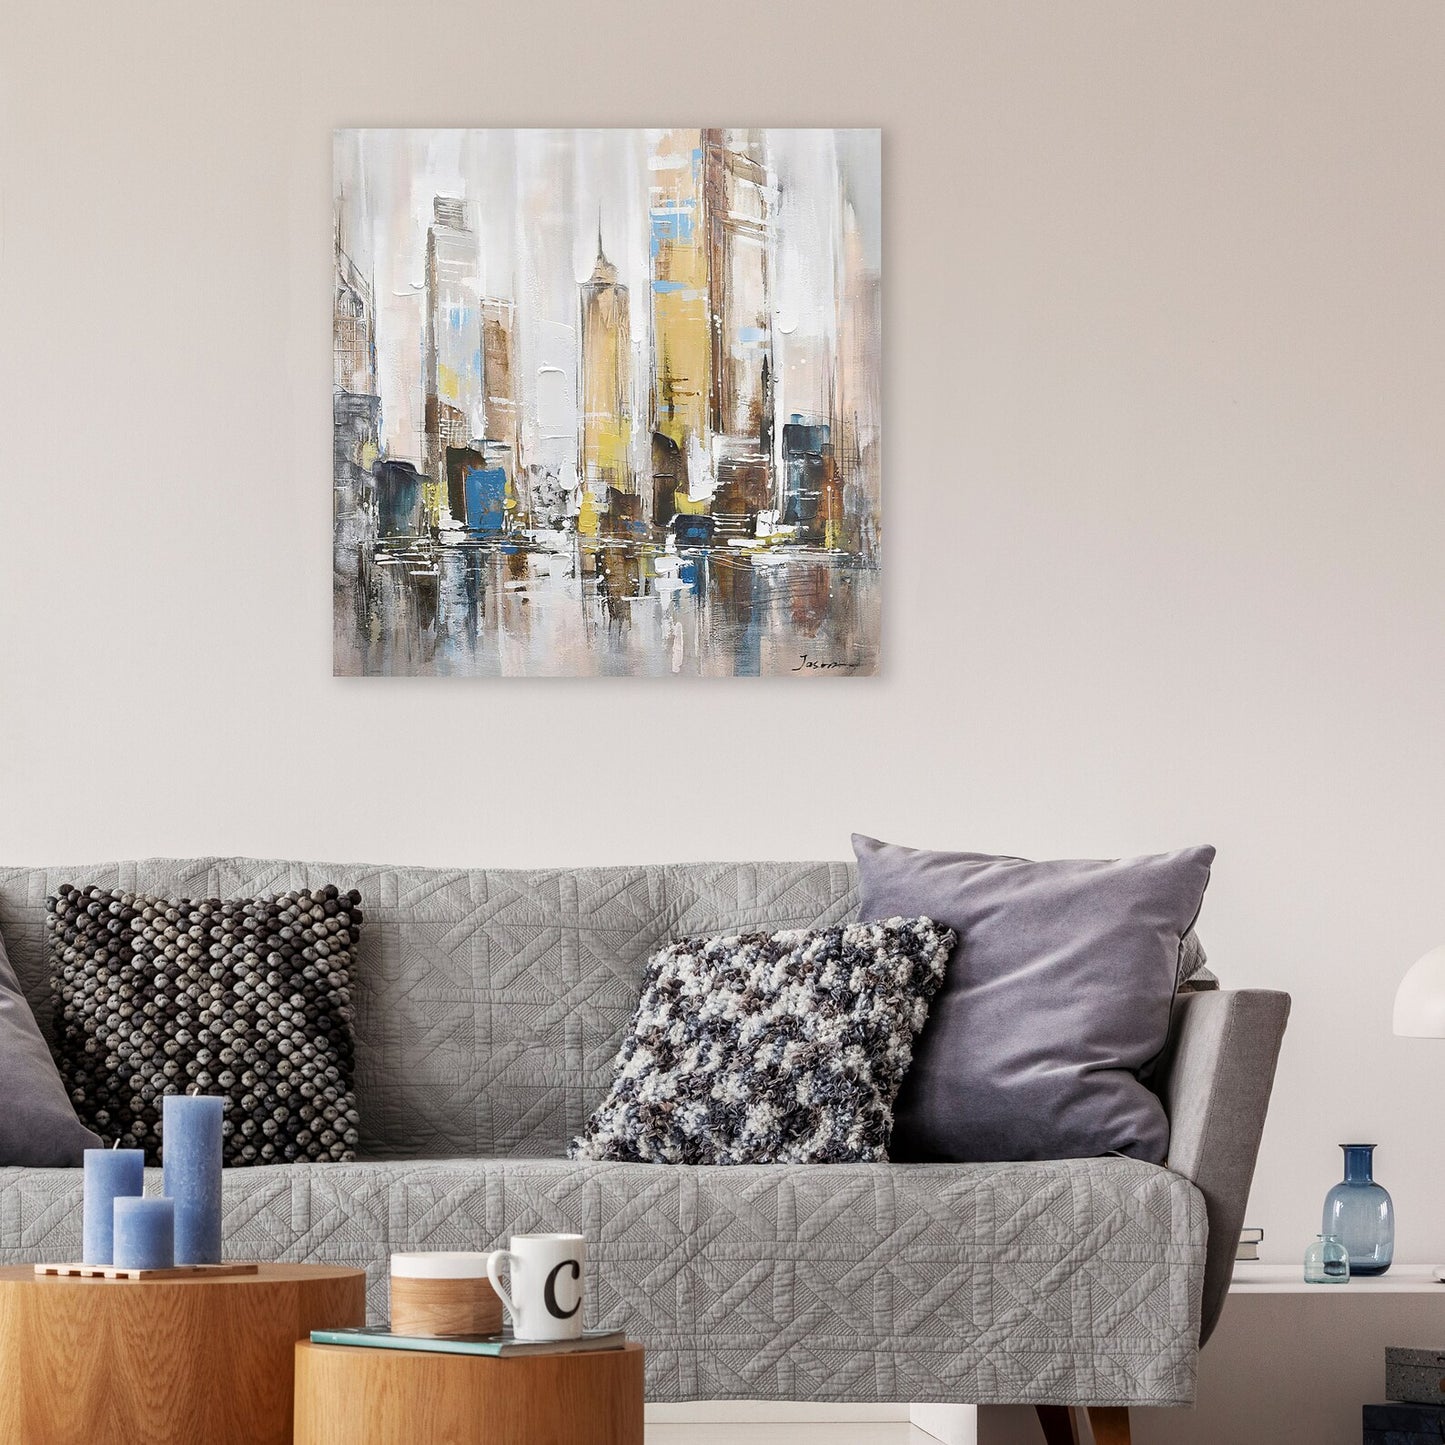 Hand-painted "Splendid city" oil painting original art, Canvas Wall art for living room, bedroom, office - Wrapped Canvas Painting